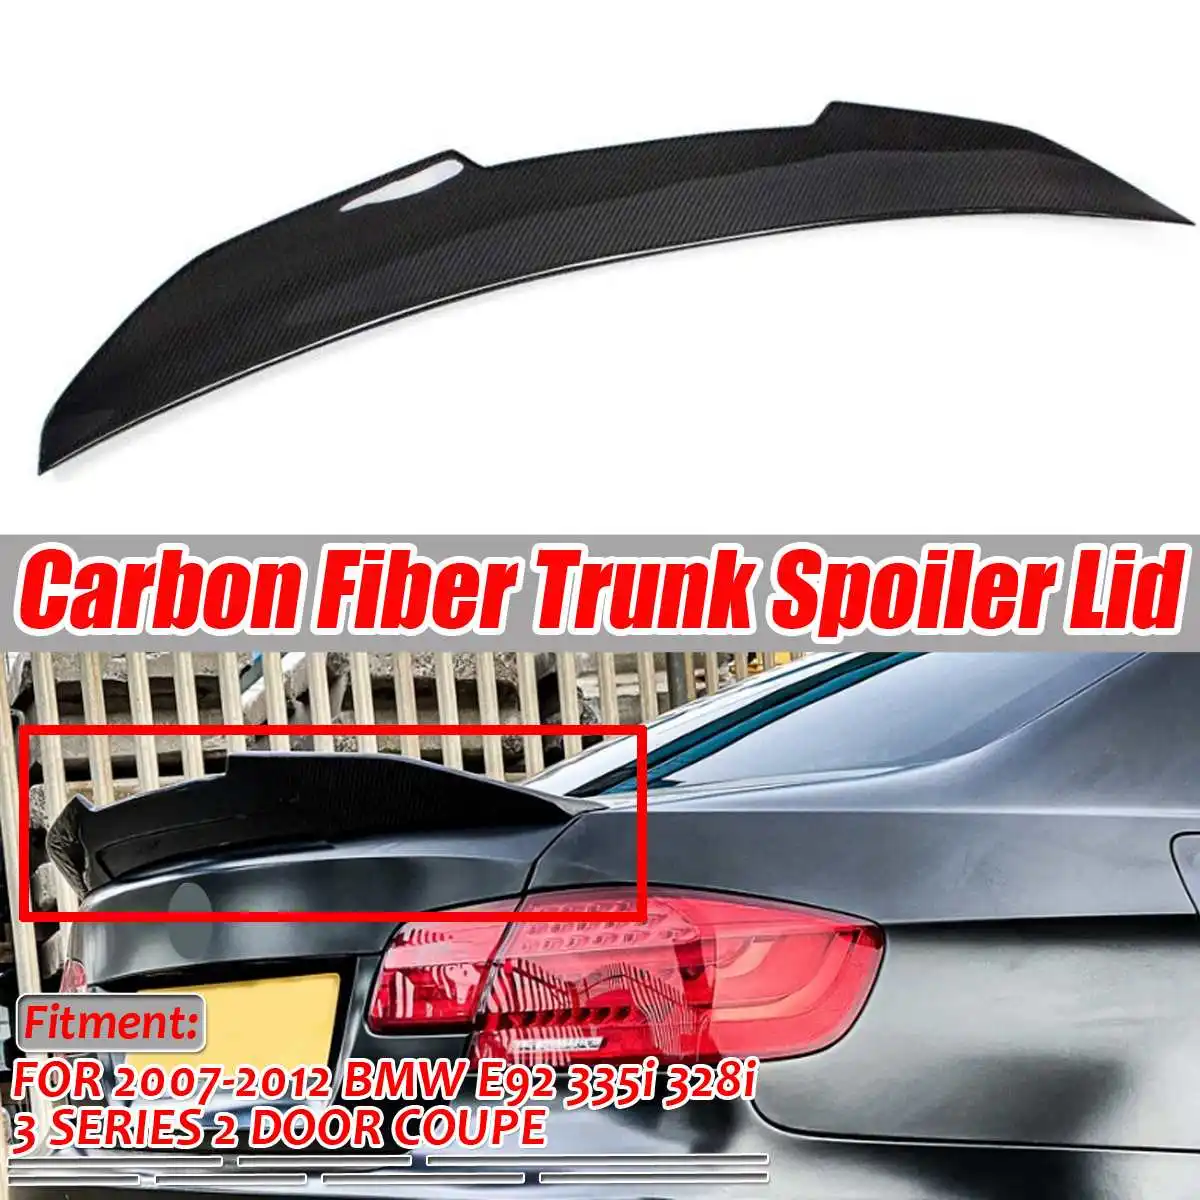 

Real Carbon Fiber Car Rear Trunk Boot Lip Spoiler Wing Lid For BMW E92 335i 328i 3 SERIES 2 DR COUPE 2007-2012 E92 Spoiler Wing